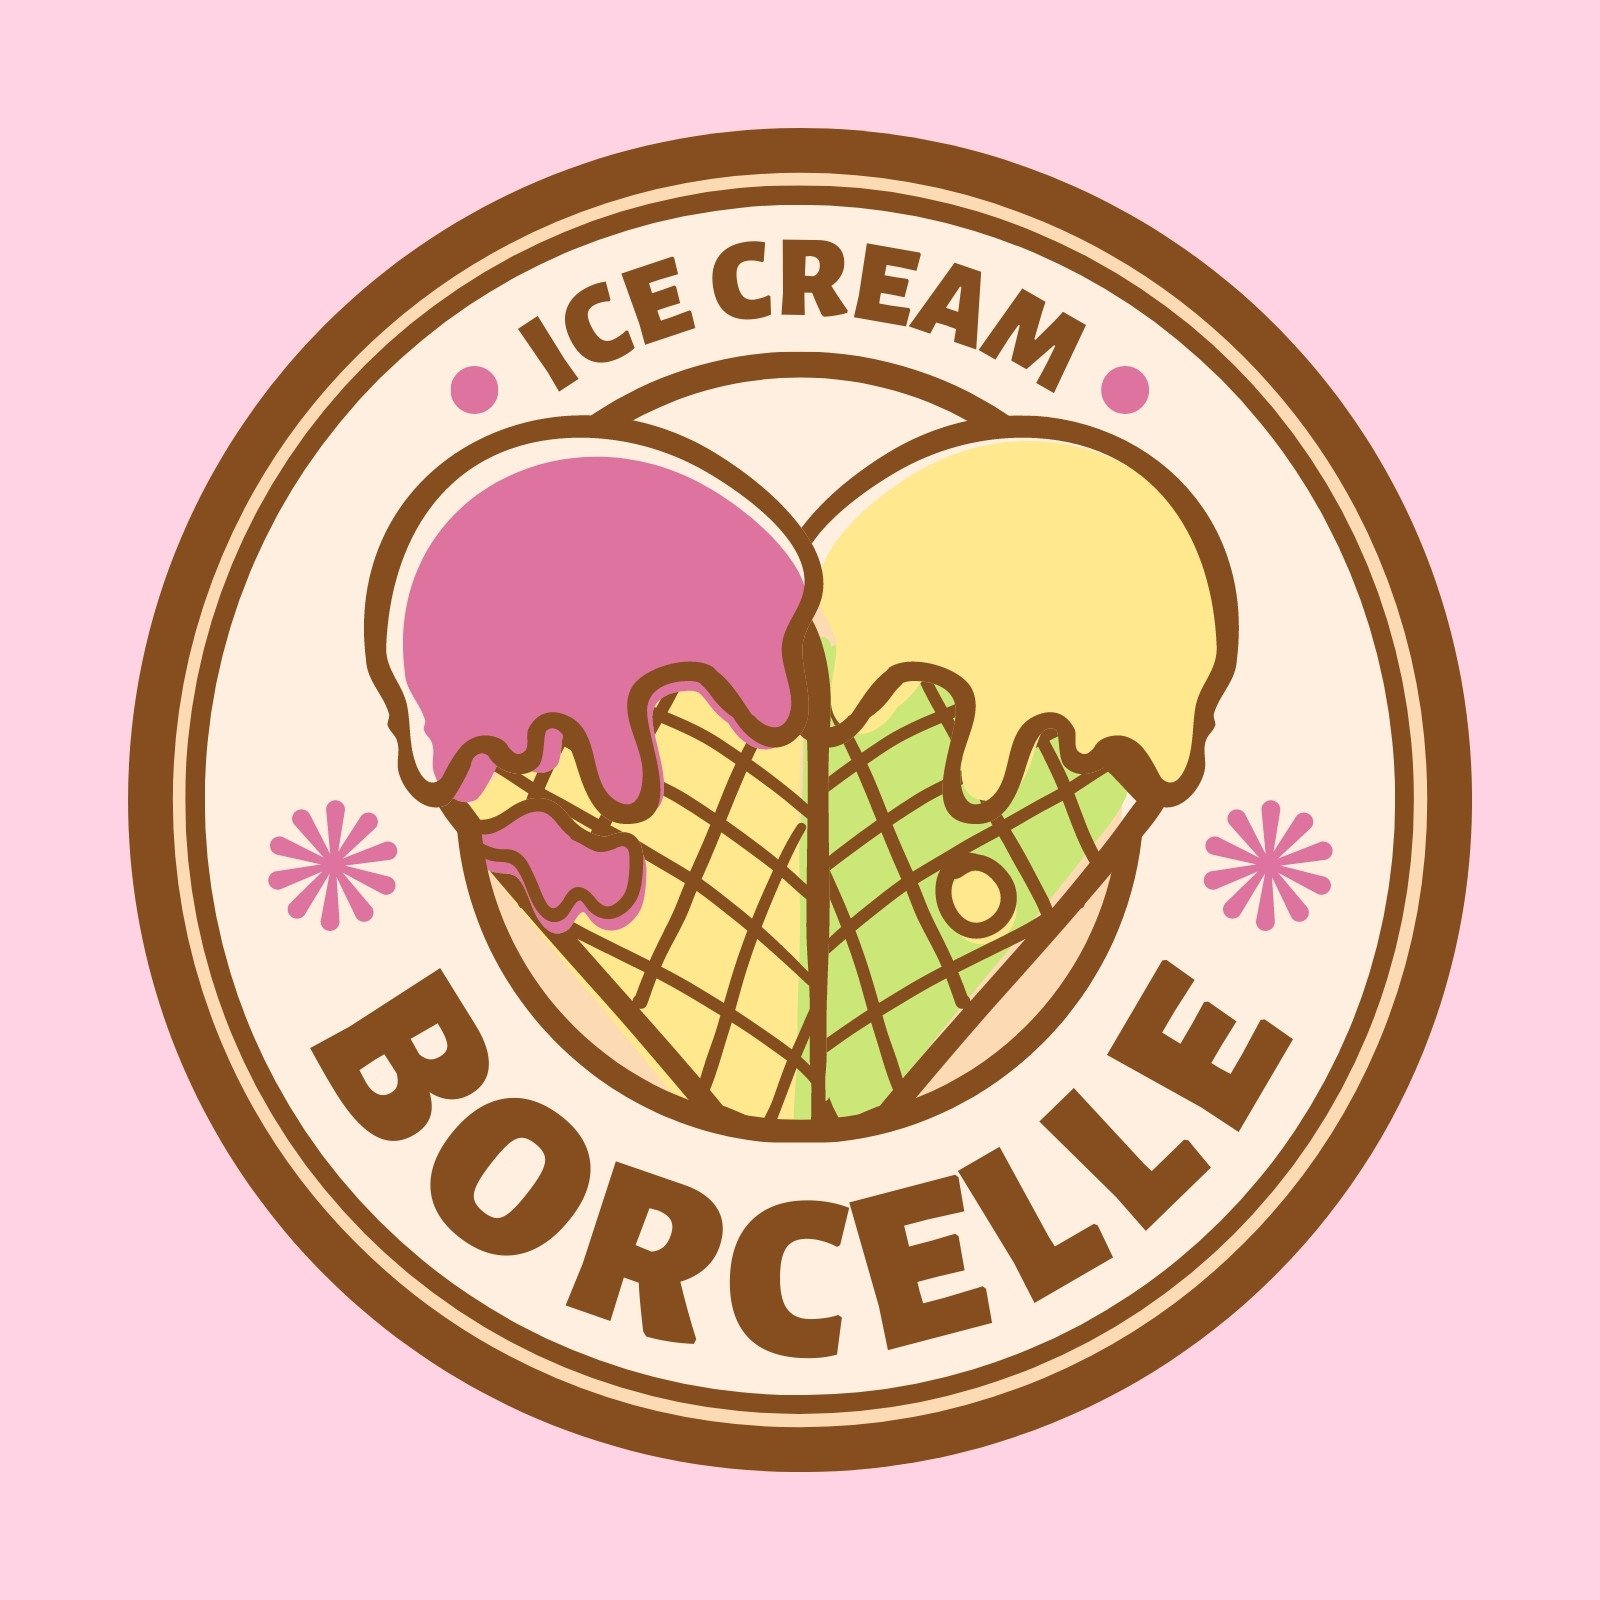 Ice cream logo Clip Art and Stock Illustrations. 18,600 Ice cream logo EPS  illustrations and vector clip art graphics available to search from  thousands of royalty free stock art creators.